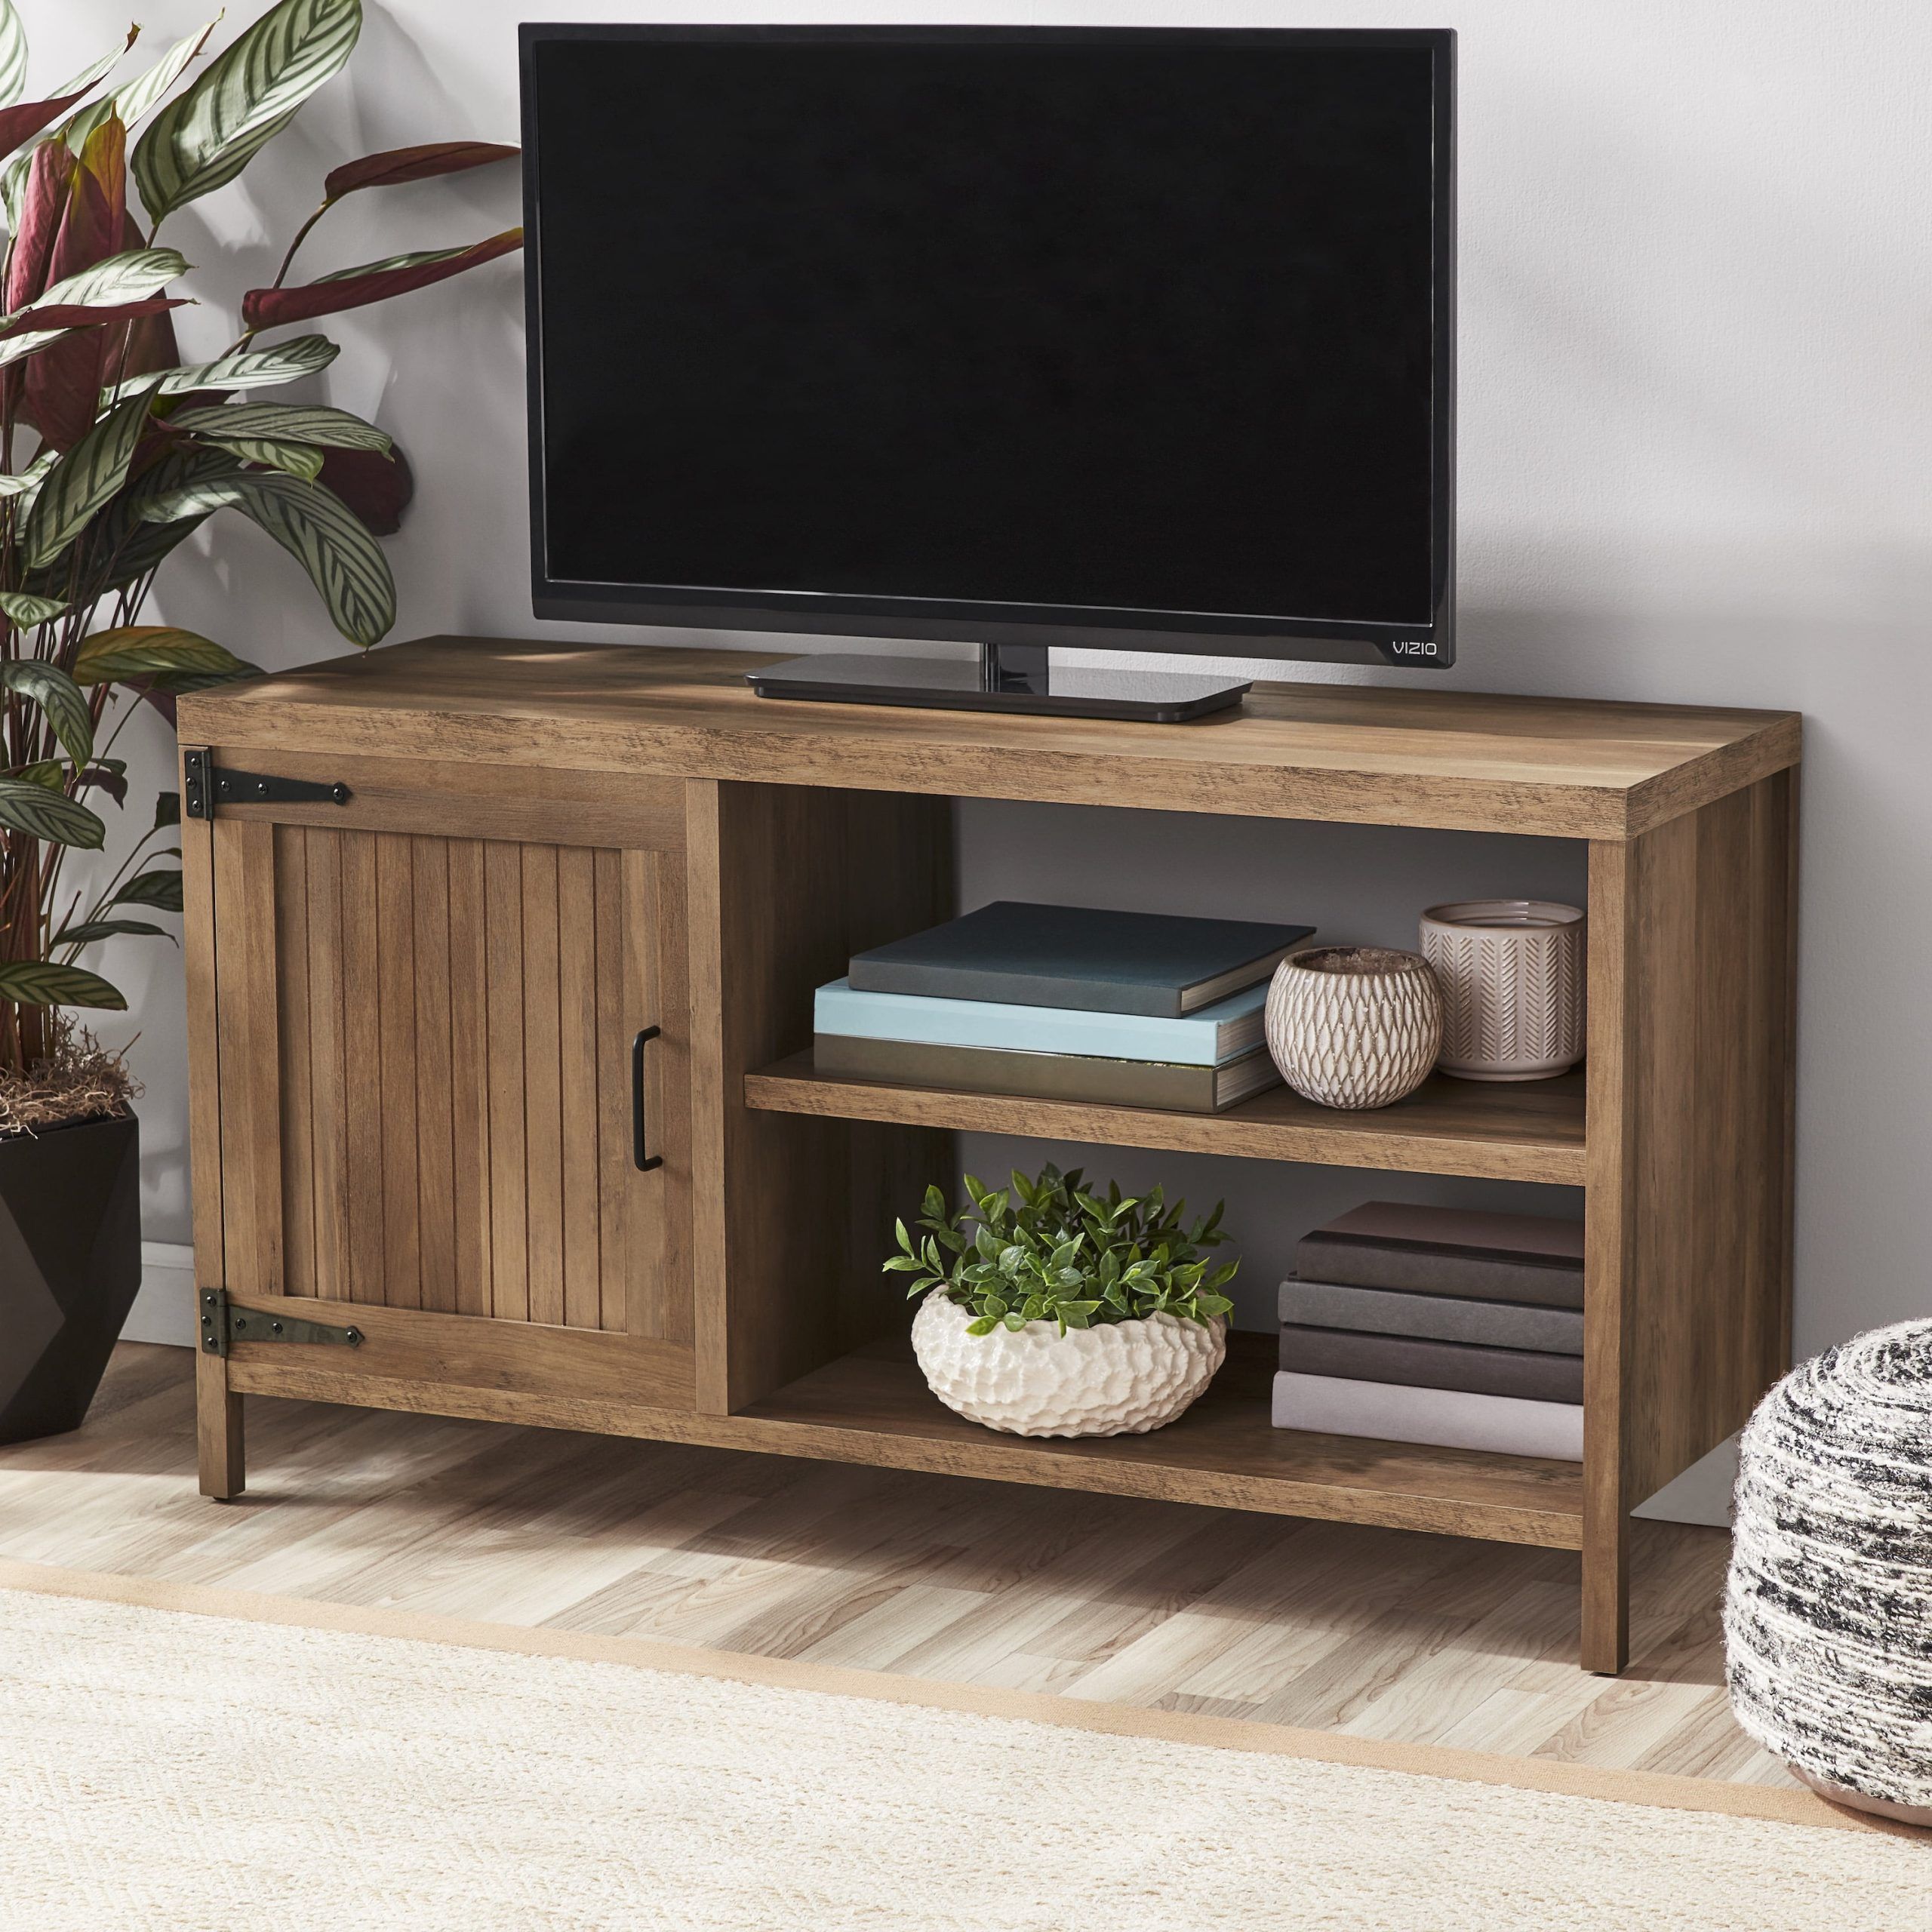 Mainstays Farmhouse Tv Stand For Tvs Up To 50", Rustic Weathered Oak In Farmhouse Tv Stands For 70 Inch Tv (View 20 of 20)